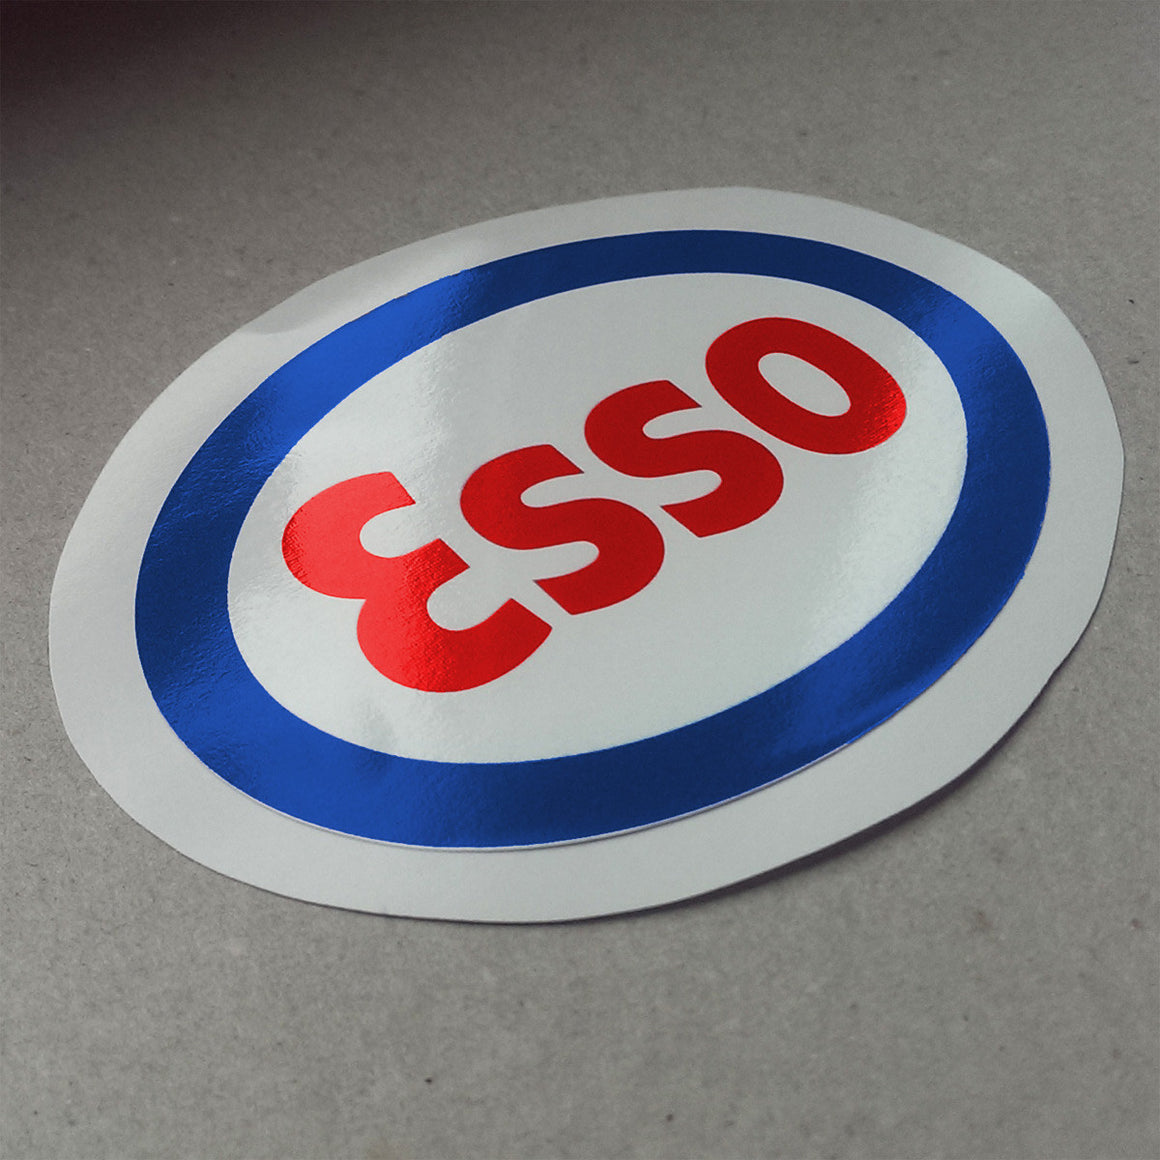 (New) Vintage 'ESSO' Decal